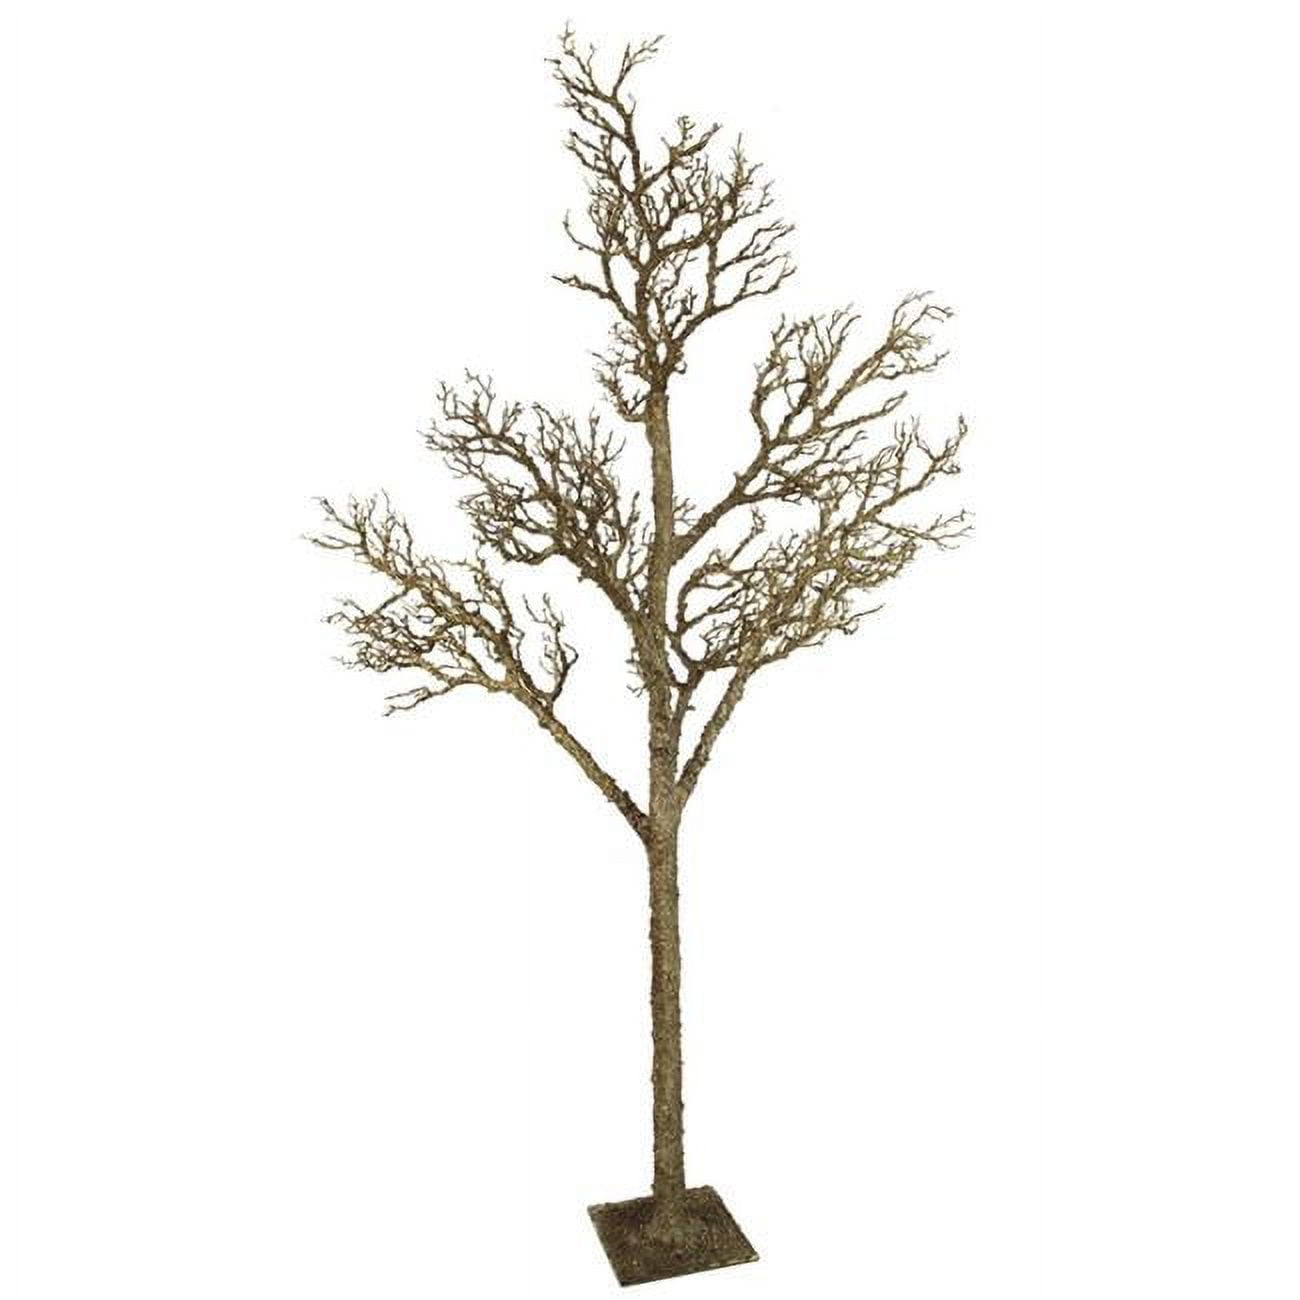 Picture of Autograph Foliages A-183170 11 ft. PE Twig Tree with No Leaves, Brown